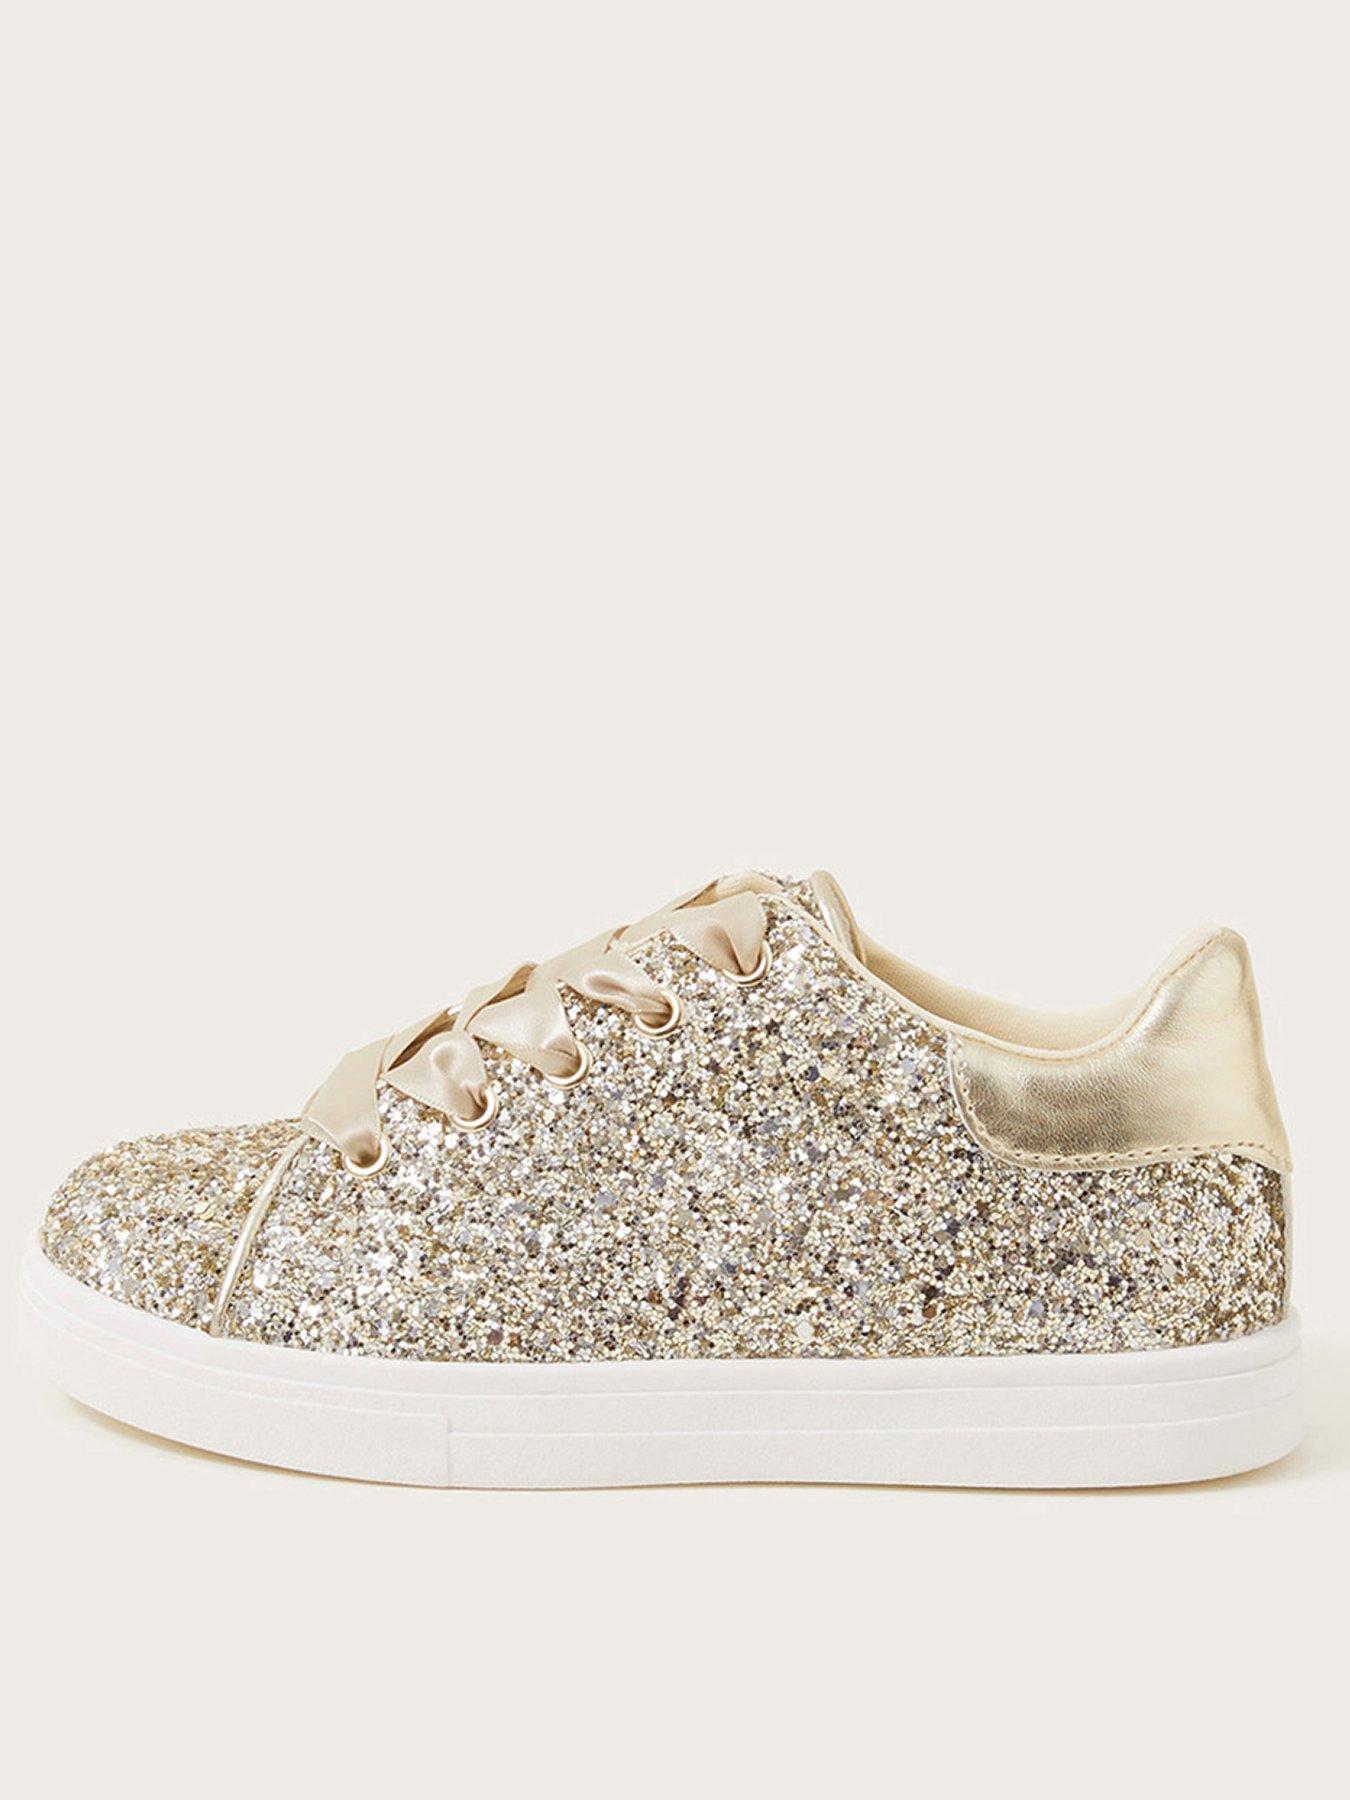 Monsoon Girls Sparkle Glitter Trainers - Gold | very.co.uk